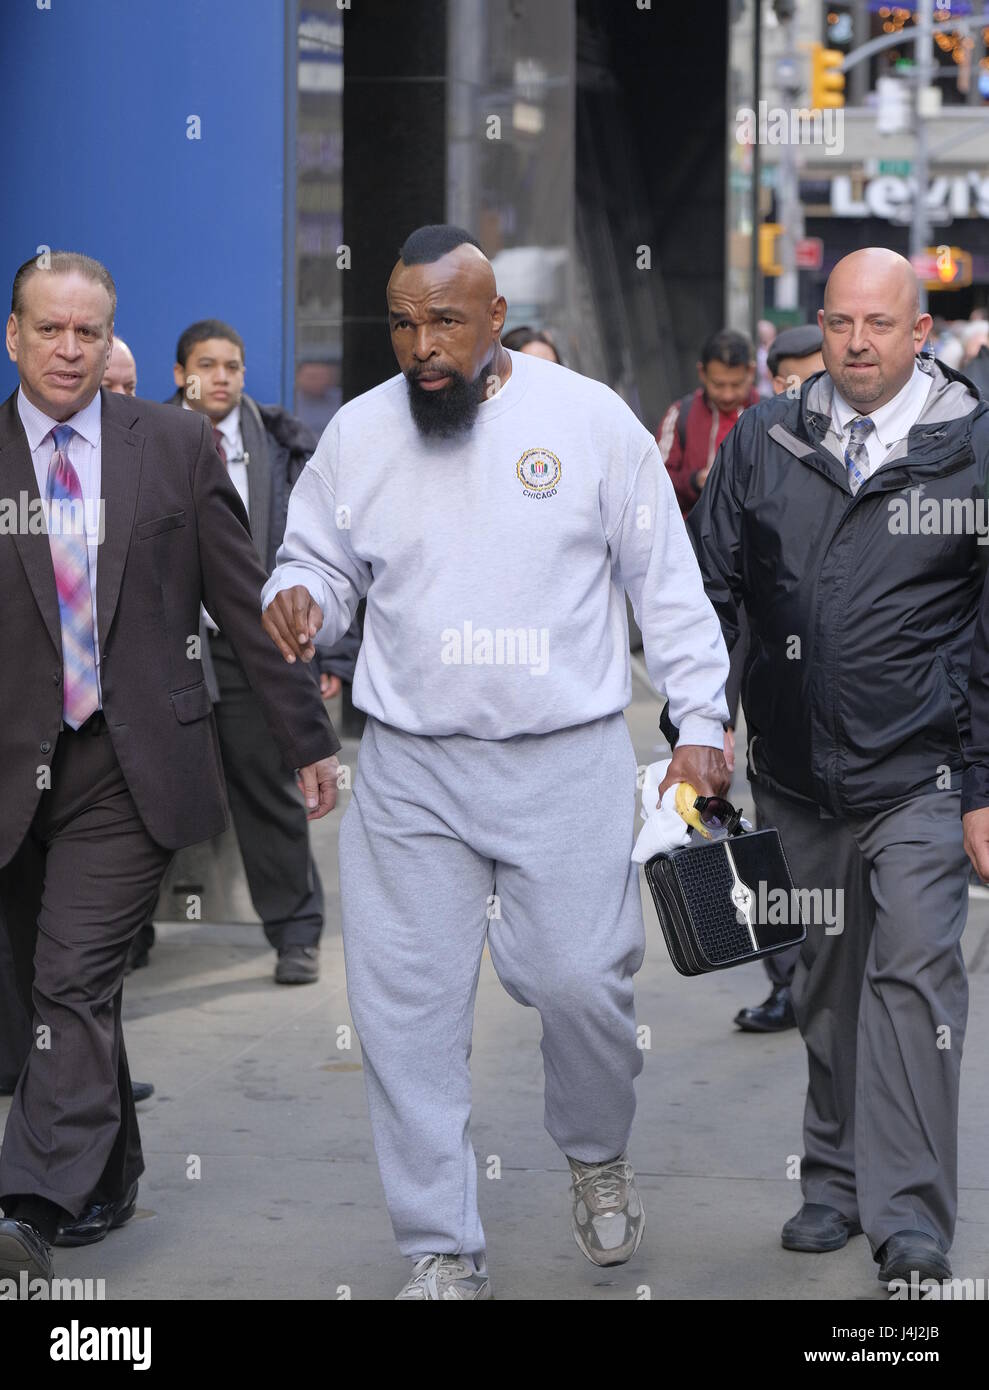 Mr T outside of the 'Good Morning America' studios in Times Square  Featuring: Mr T Where: Manhattan, New York, United States When: 11 Apr 2017 Credit: TNYF/WENN.com Stock Photo